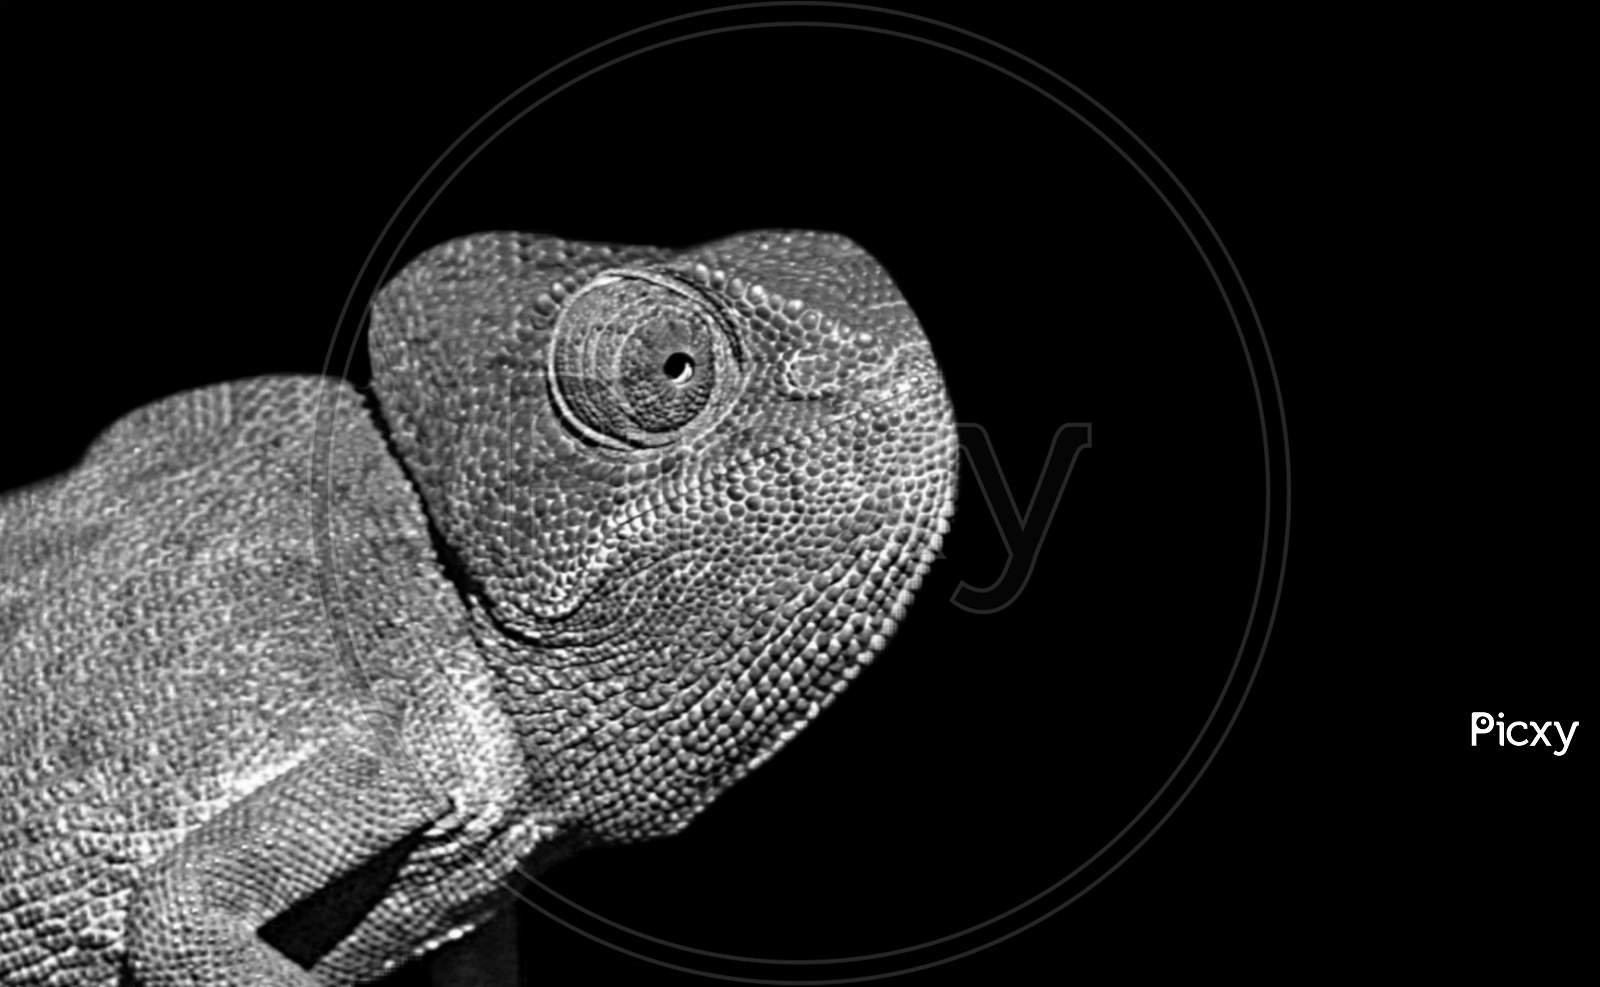 Black And White Chameleons Closeup In The Black Background